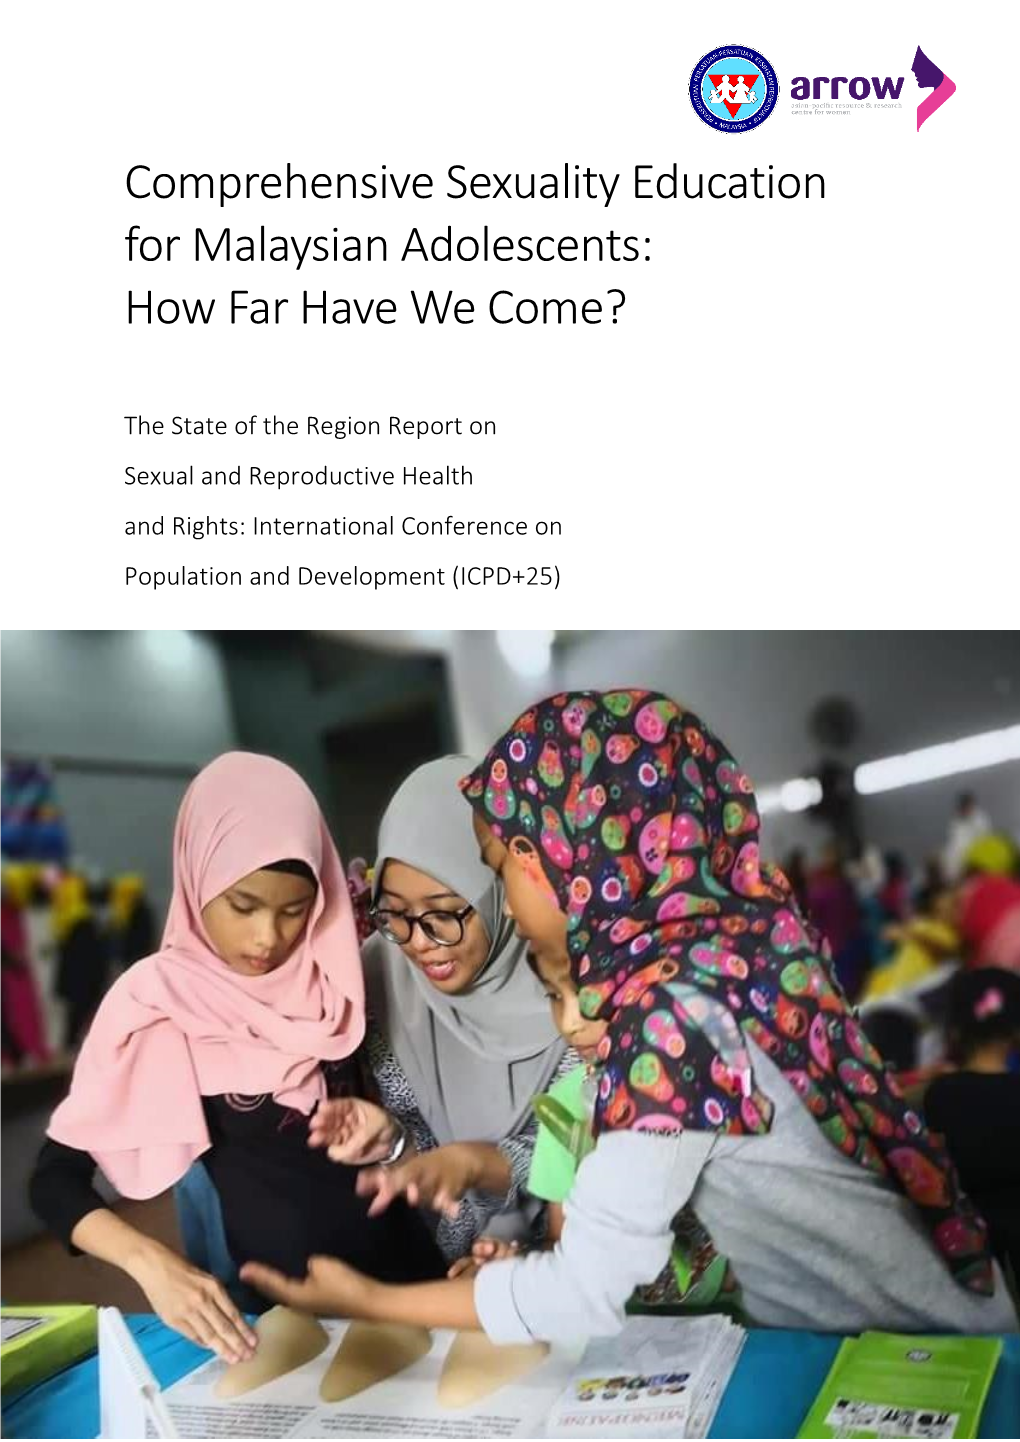 Comprehensive Sexuality Education for Malaysian Adolescents: How Far Have We Come?